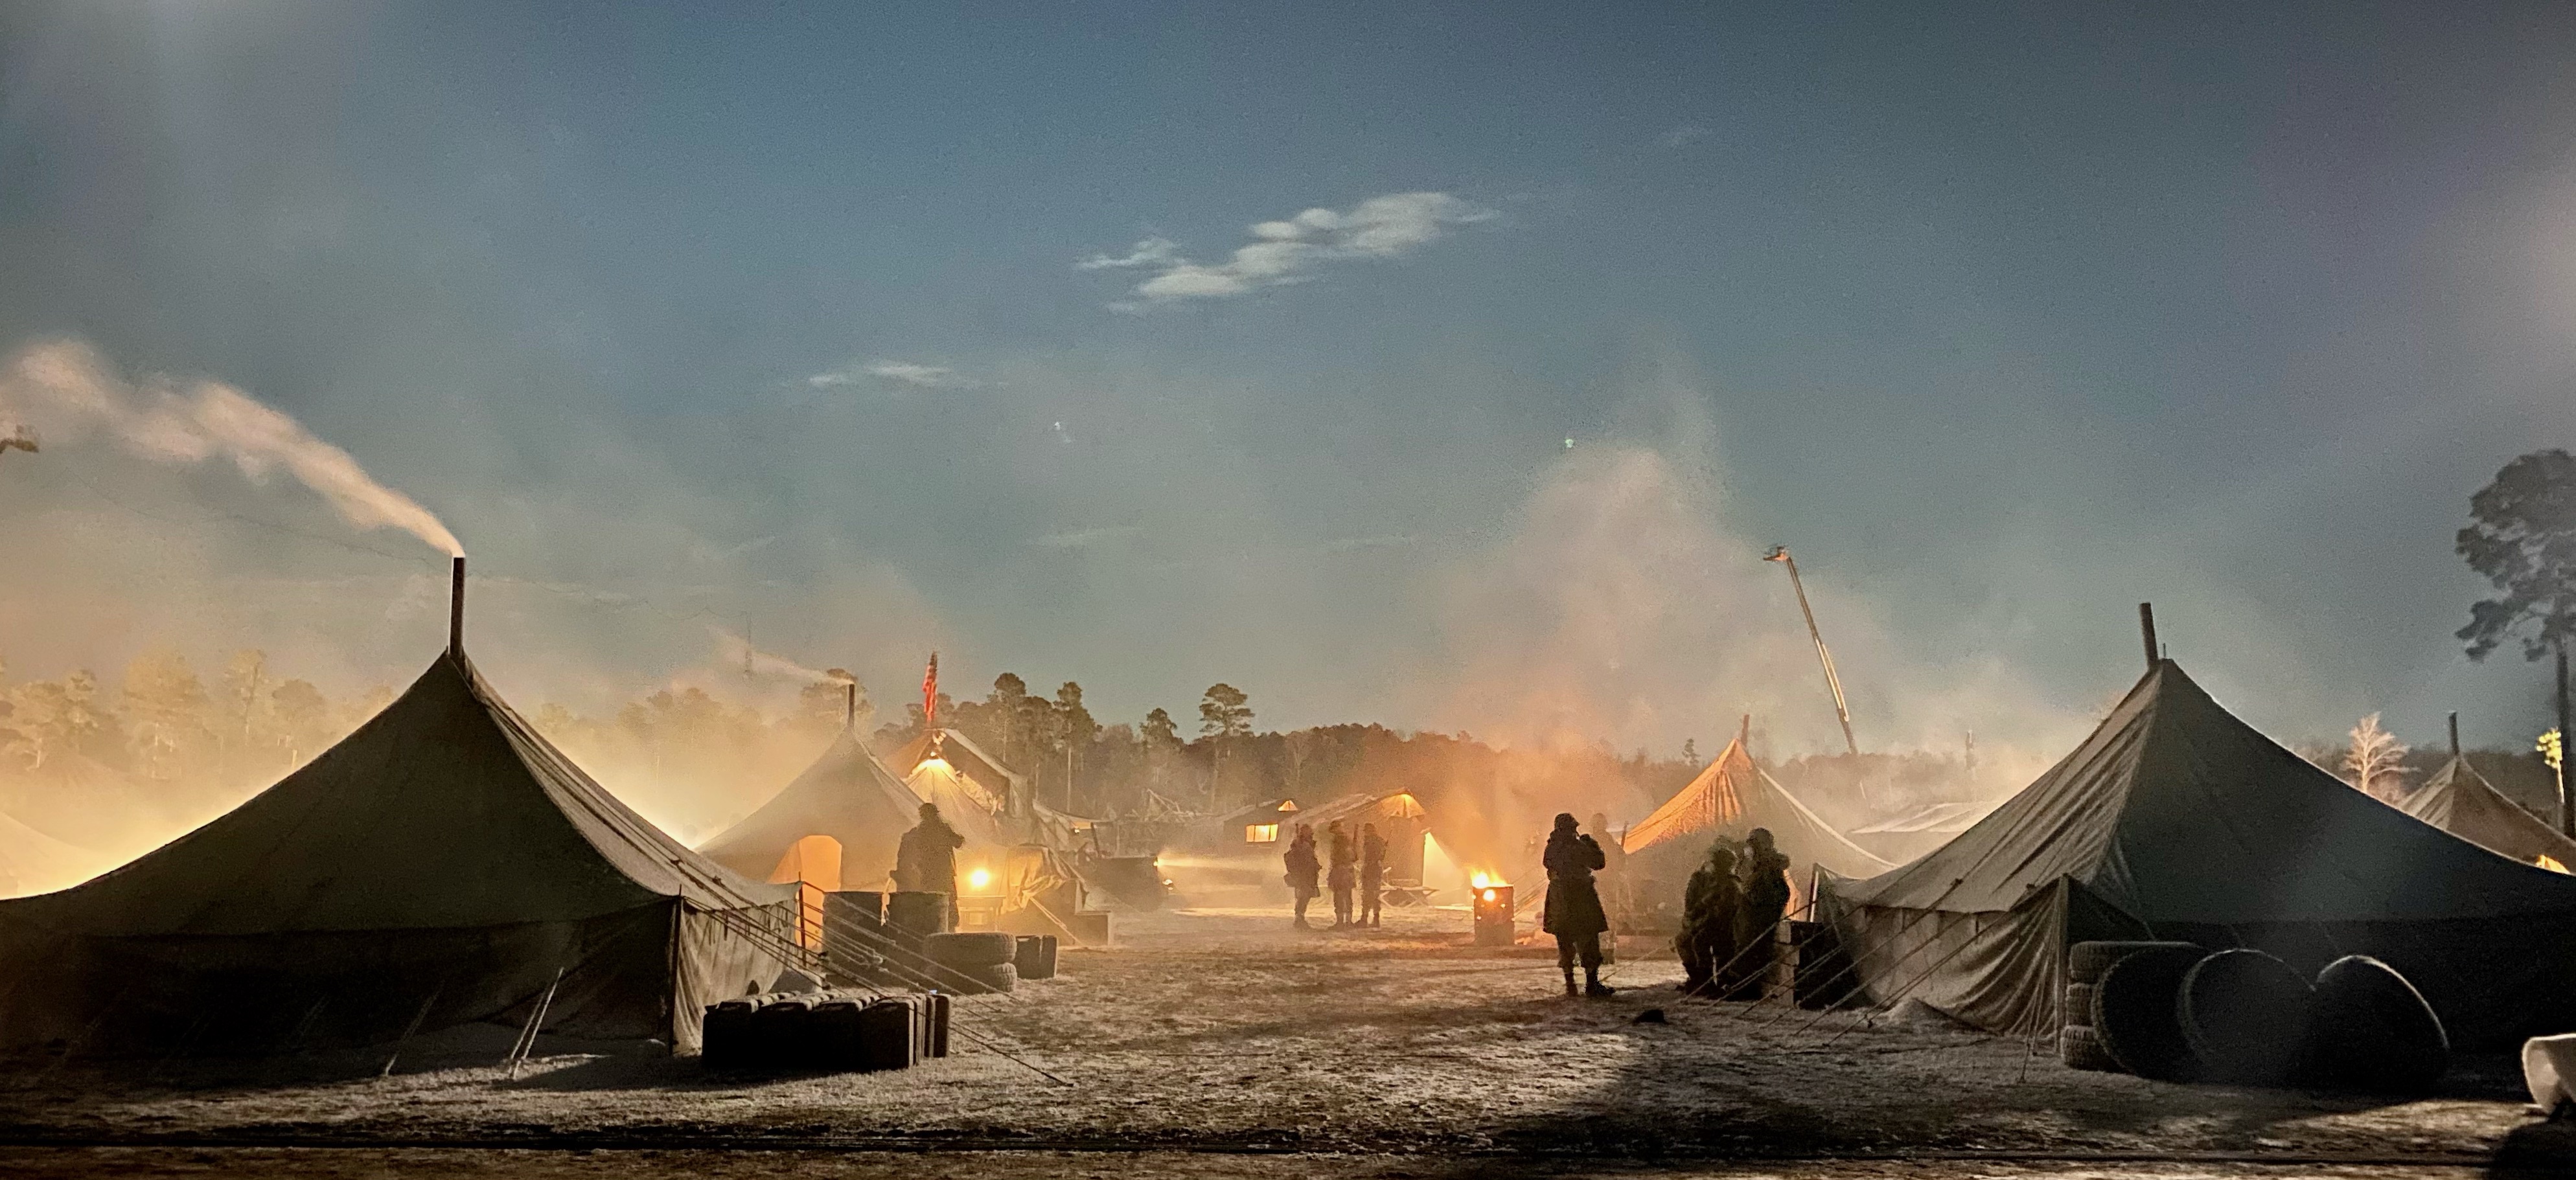 Photo of film set at dusk with tents, people and a small fire